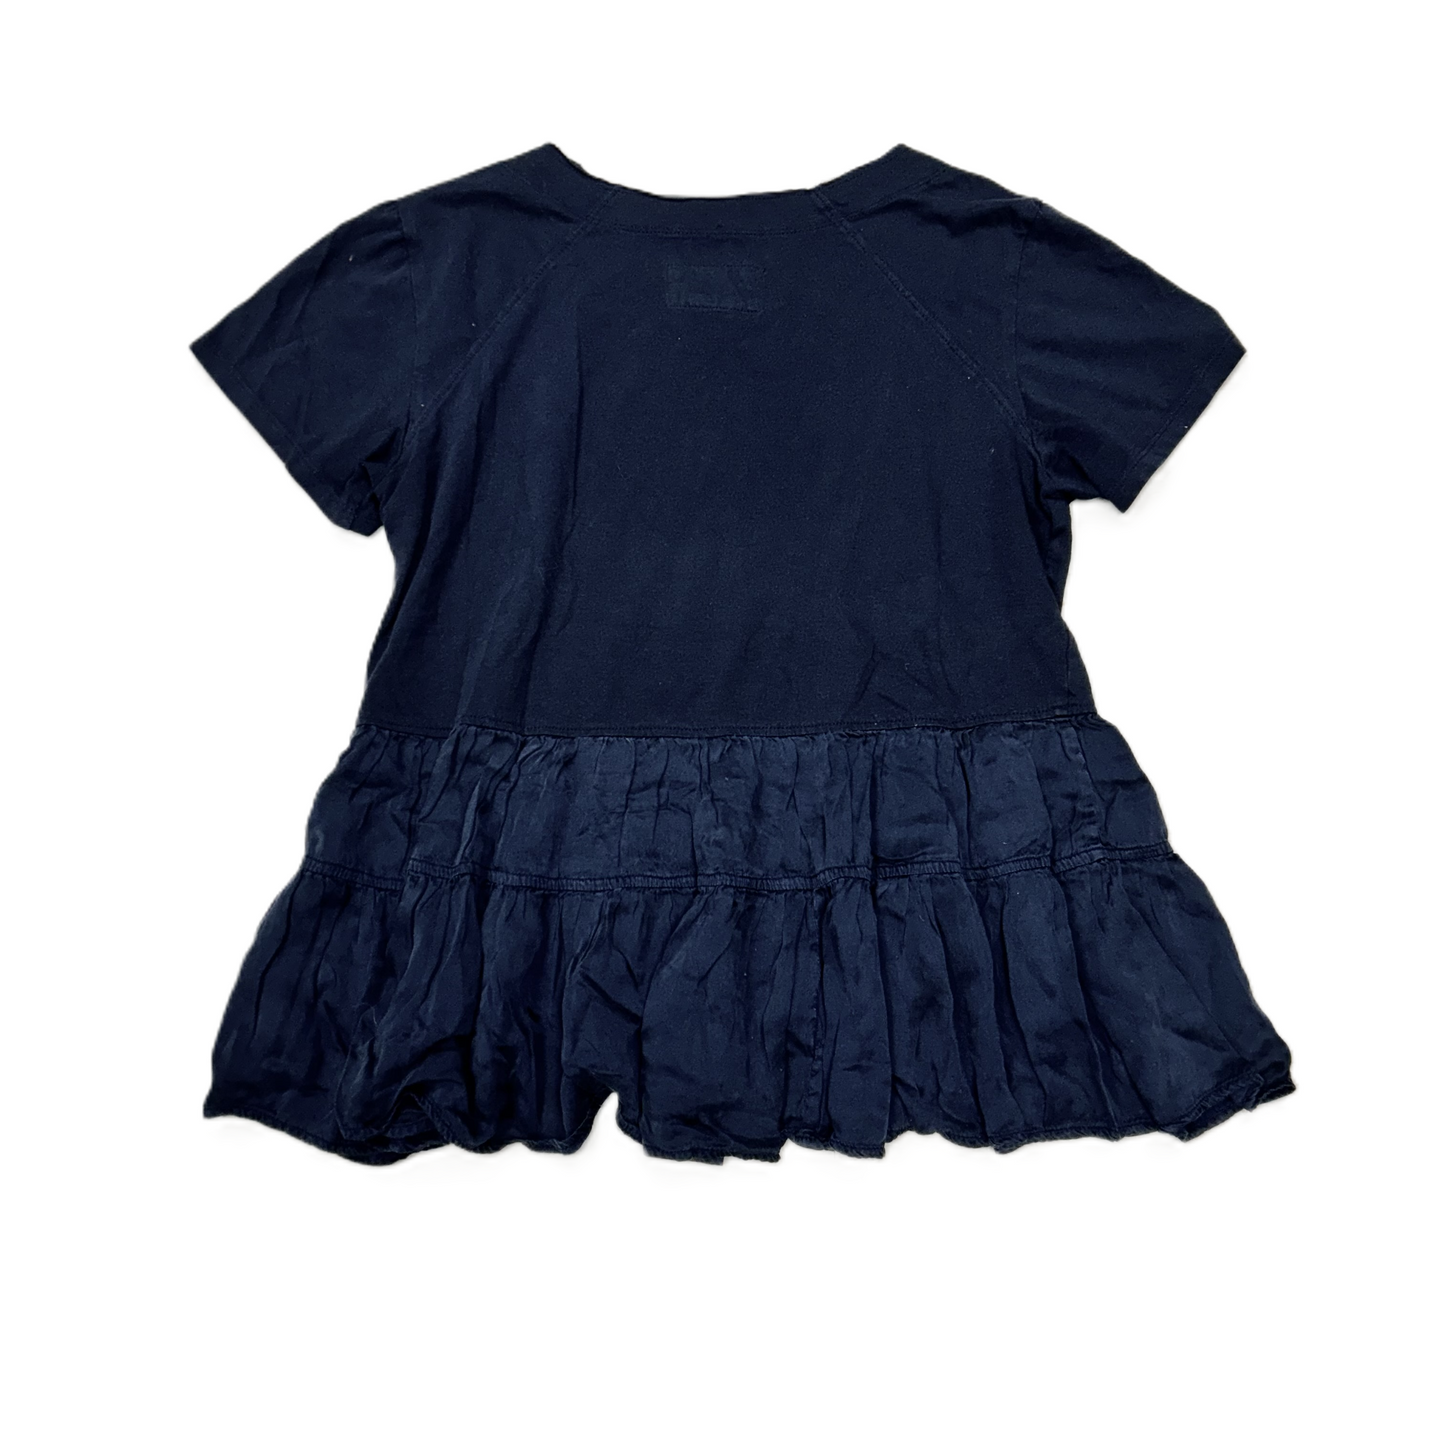 Navy Top Short Sleeve By Anthropologie, Size: S